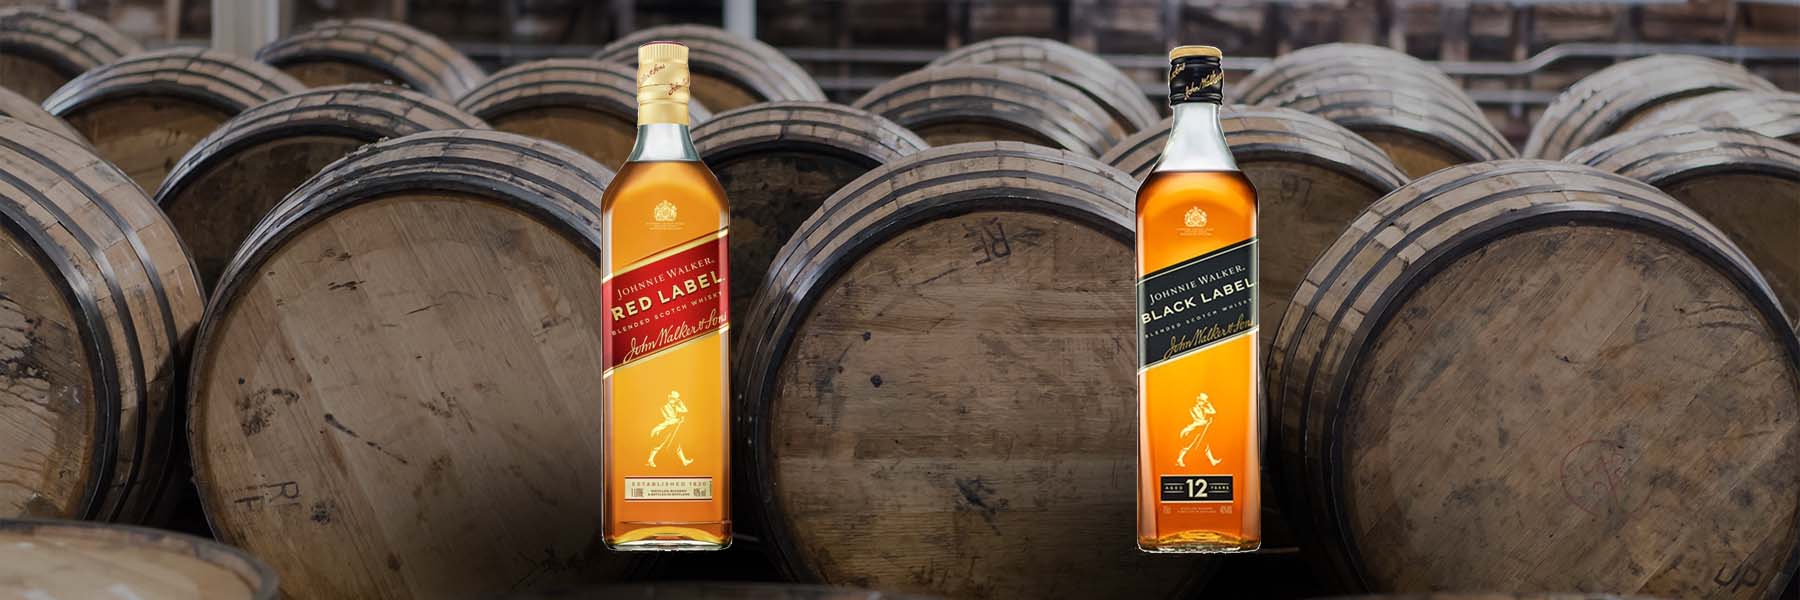 Red Label Vs Black Label: Which of the Two Scotch Whiskies Is Best?